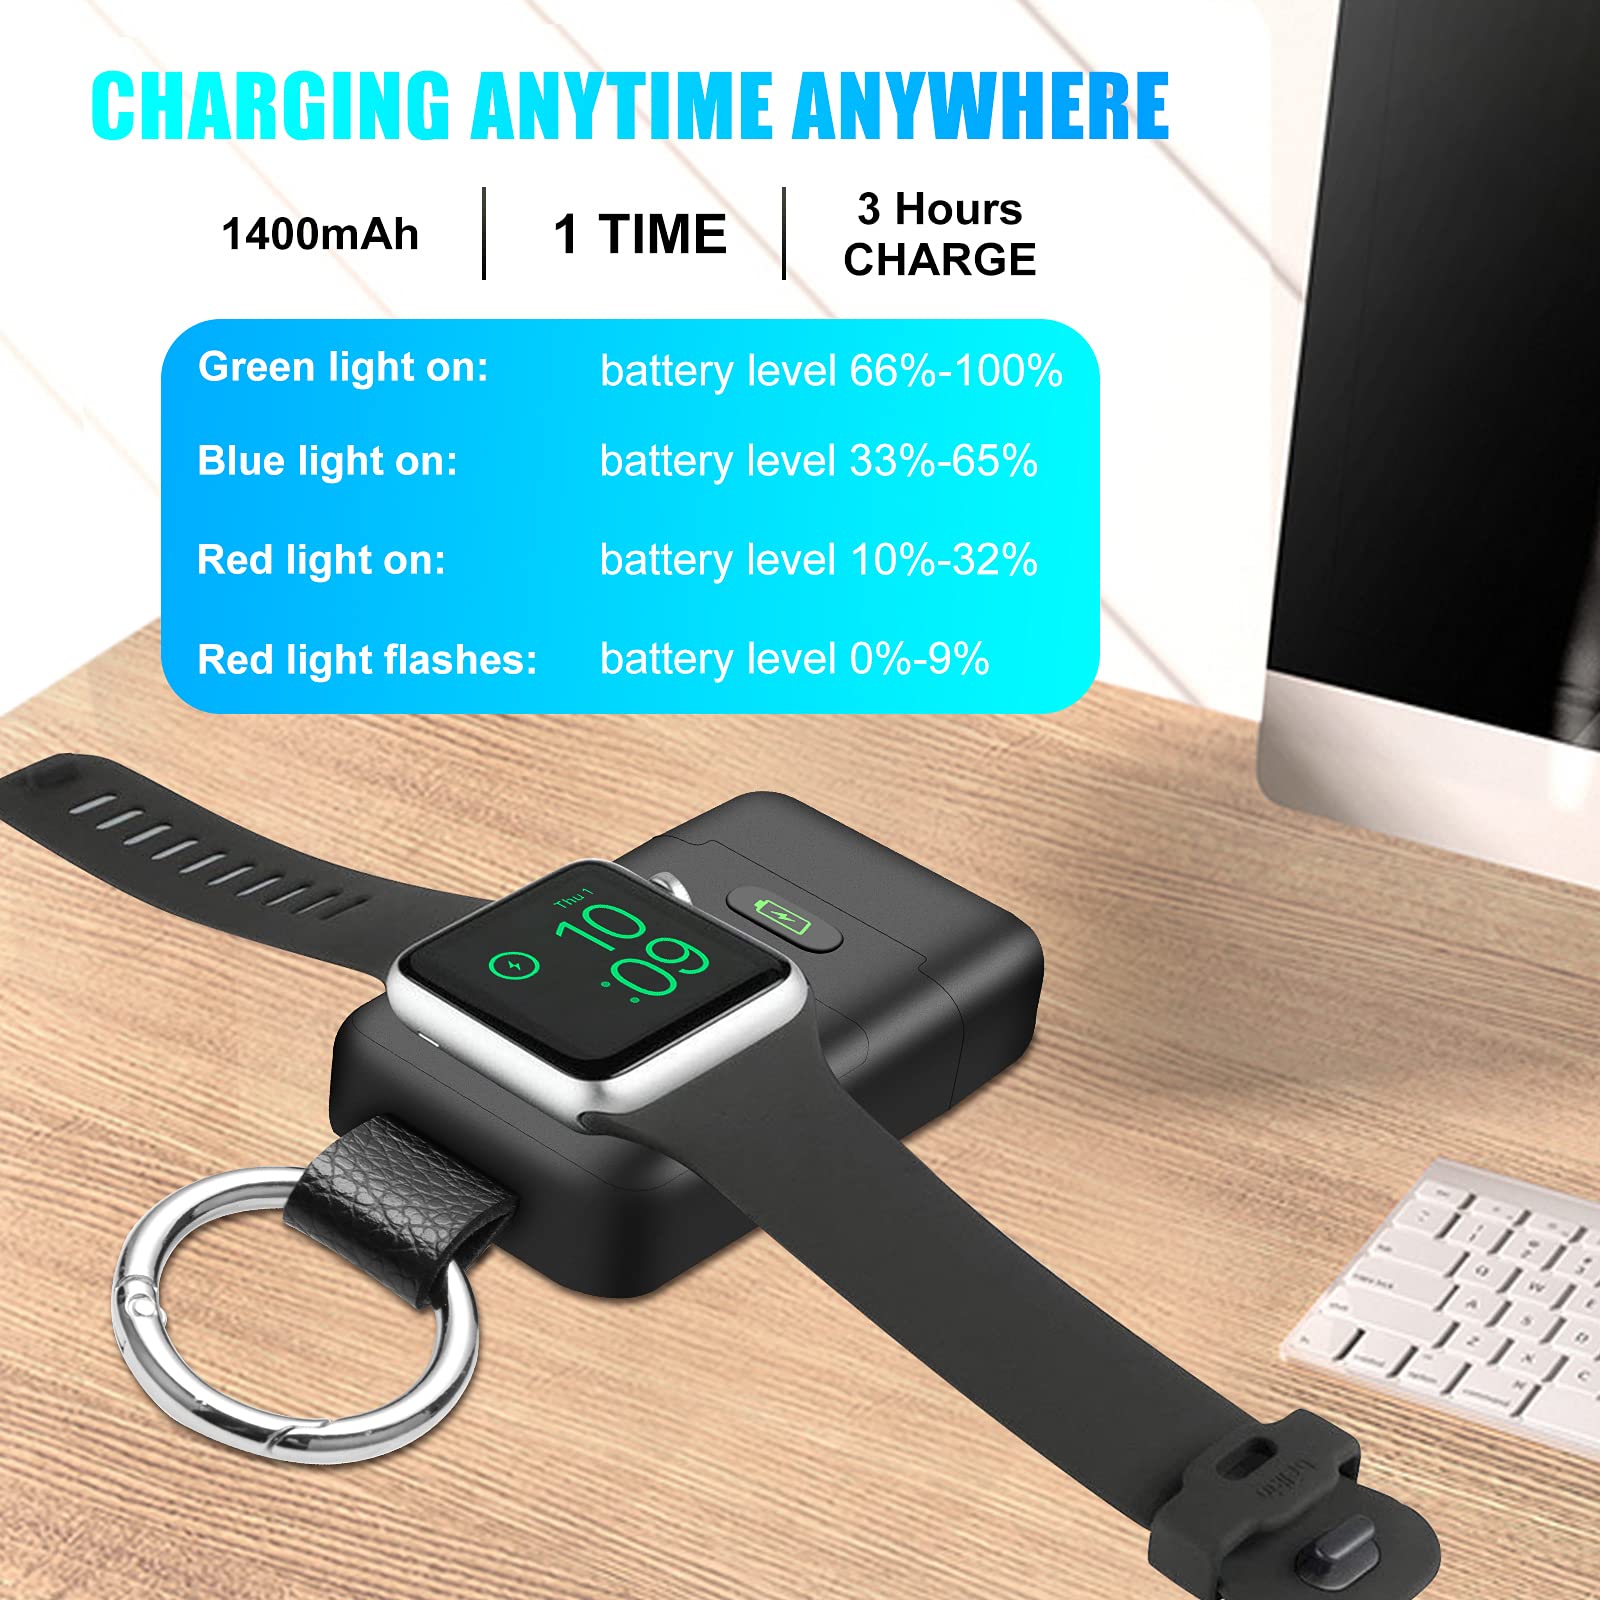 Portable Wireless Charger for Apple Watch,HUOTO Upgraded iWatch Charger 1400mAh Smart Keychain Power Bank,Portable Magnetic iWatch Charger for Apple Watch Series 8/UItra/7/6/SE/5/4/3/2/1 (Black)